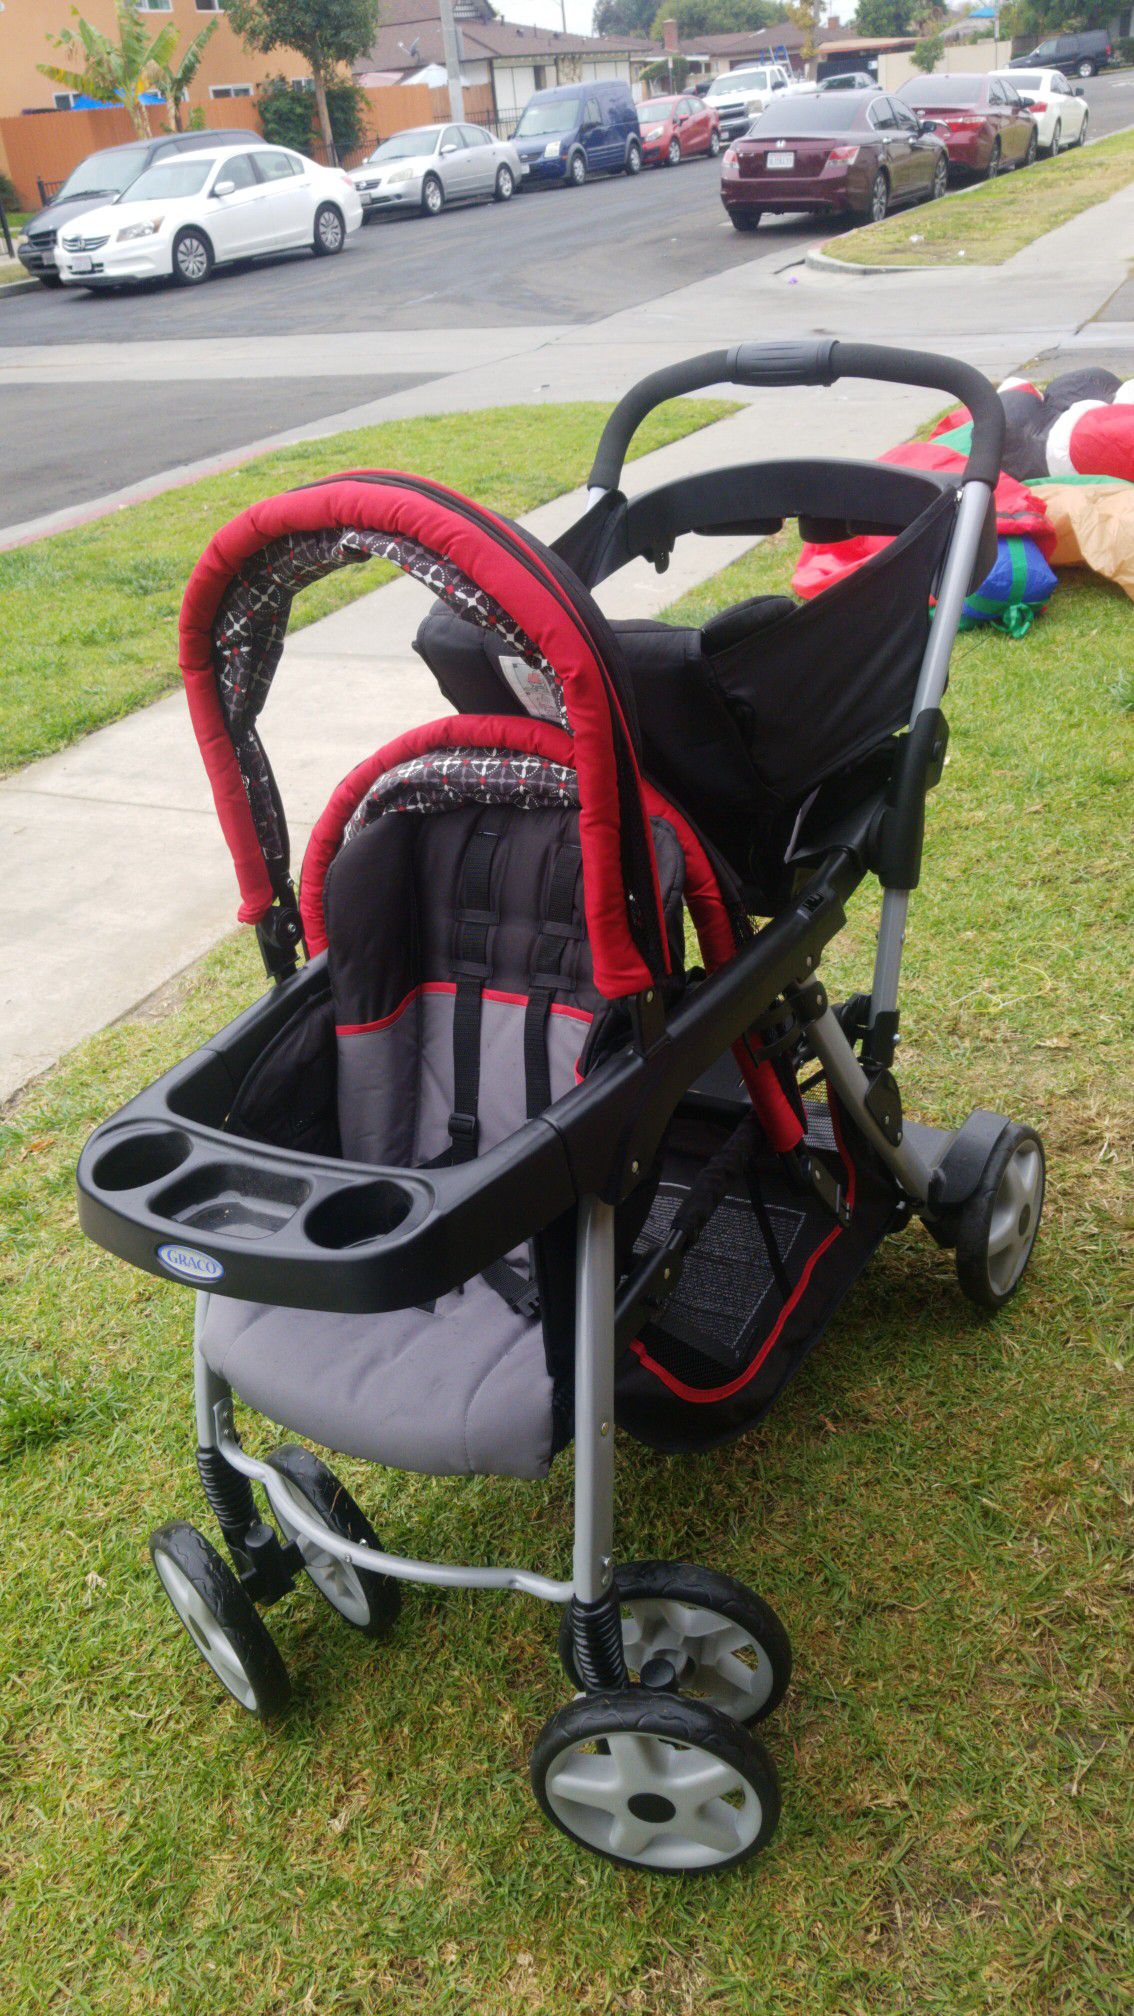 stroller double. carreola doble , olmost new. new nueva